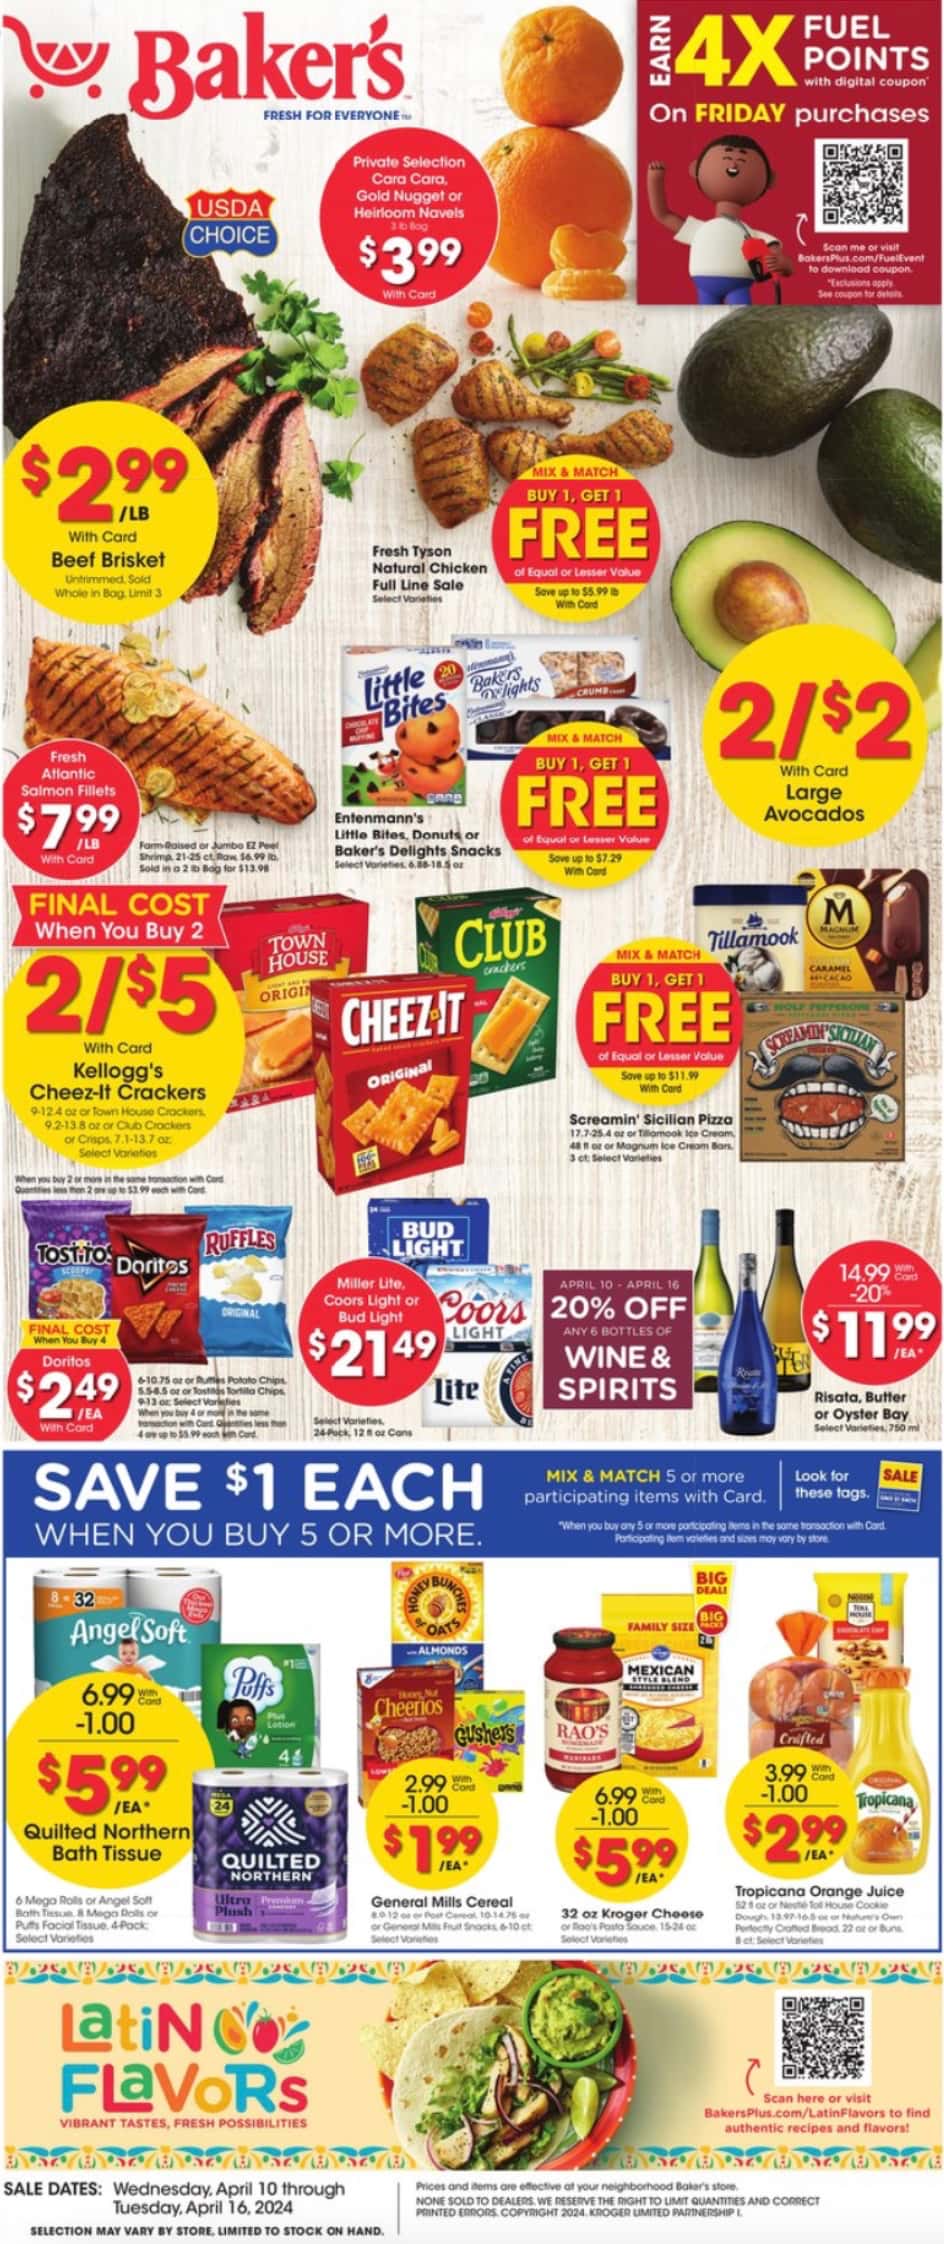 Bakers_weekly_ad_041024_01